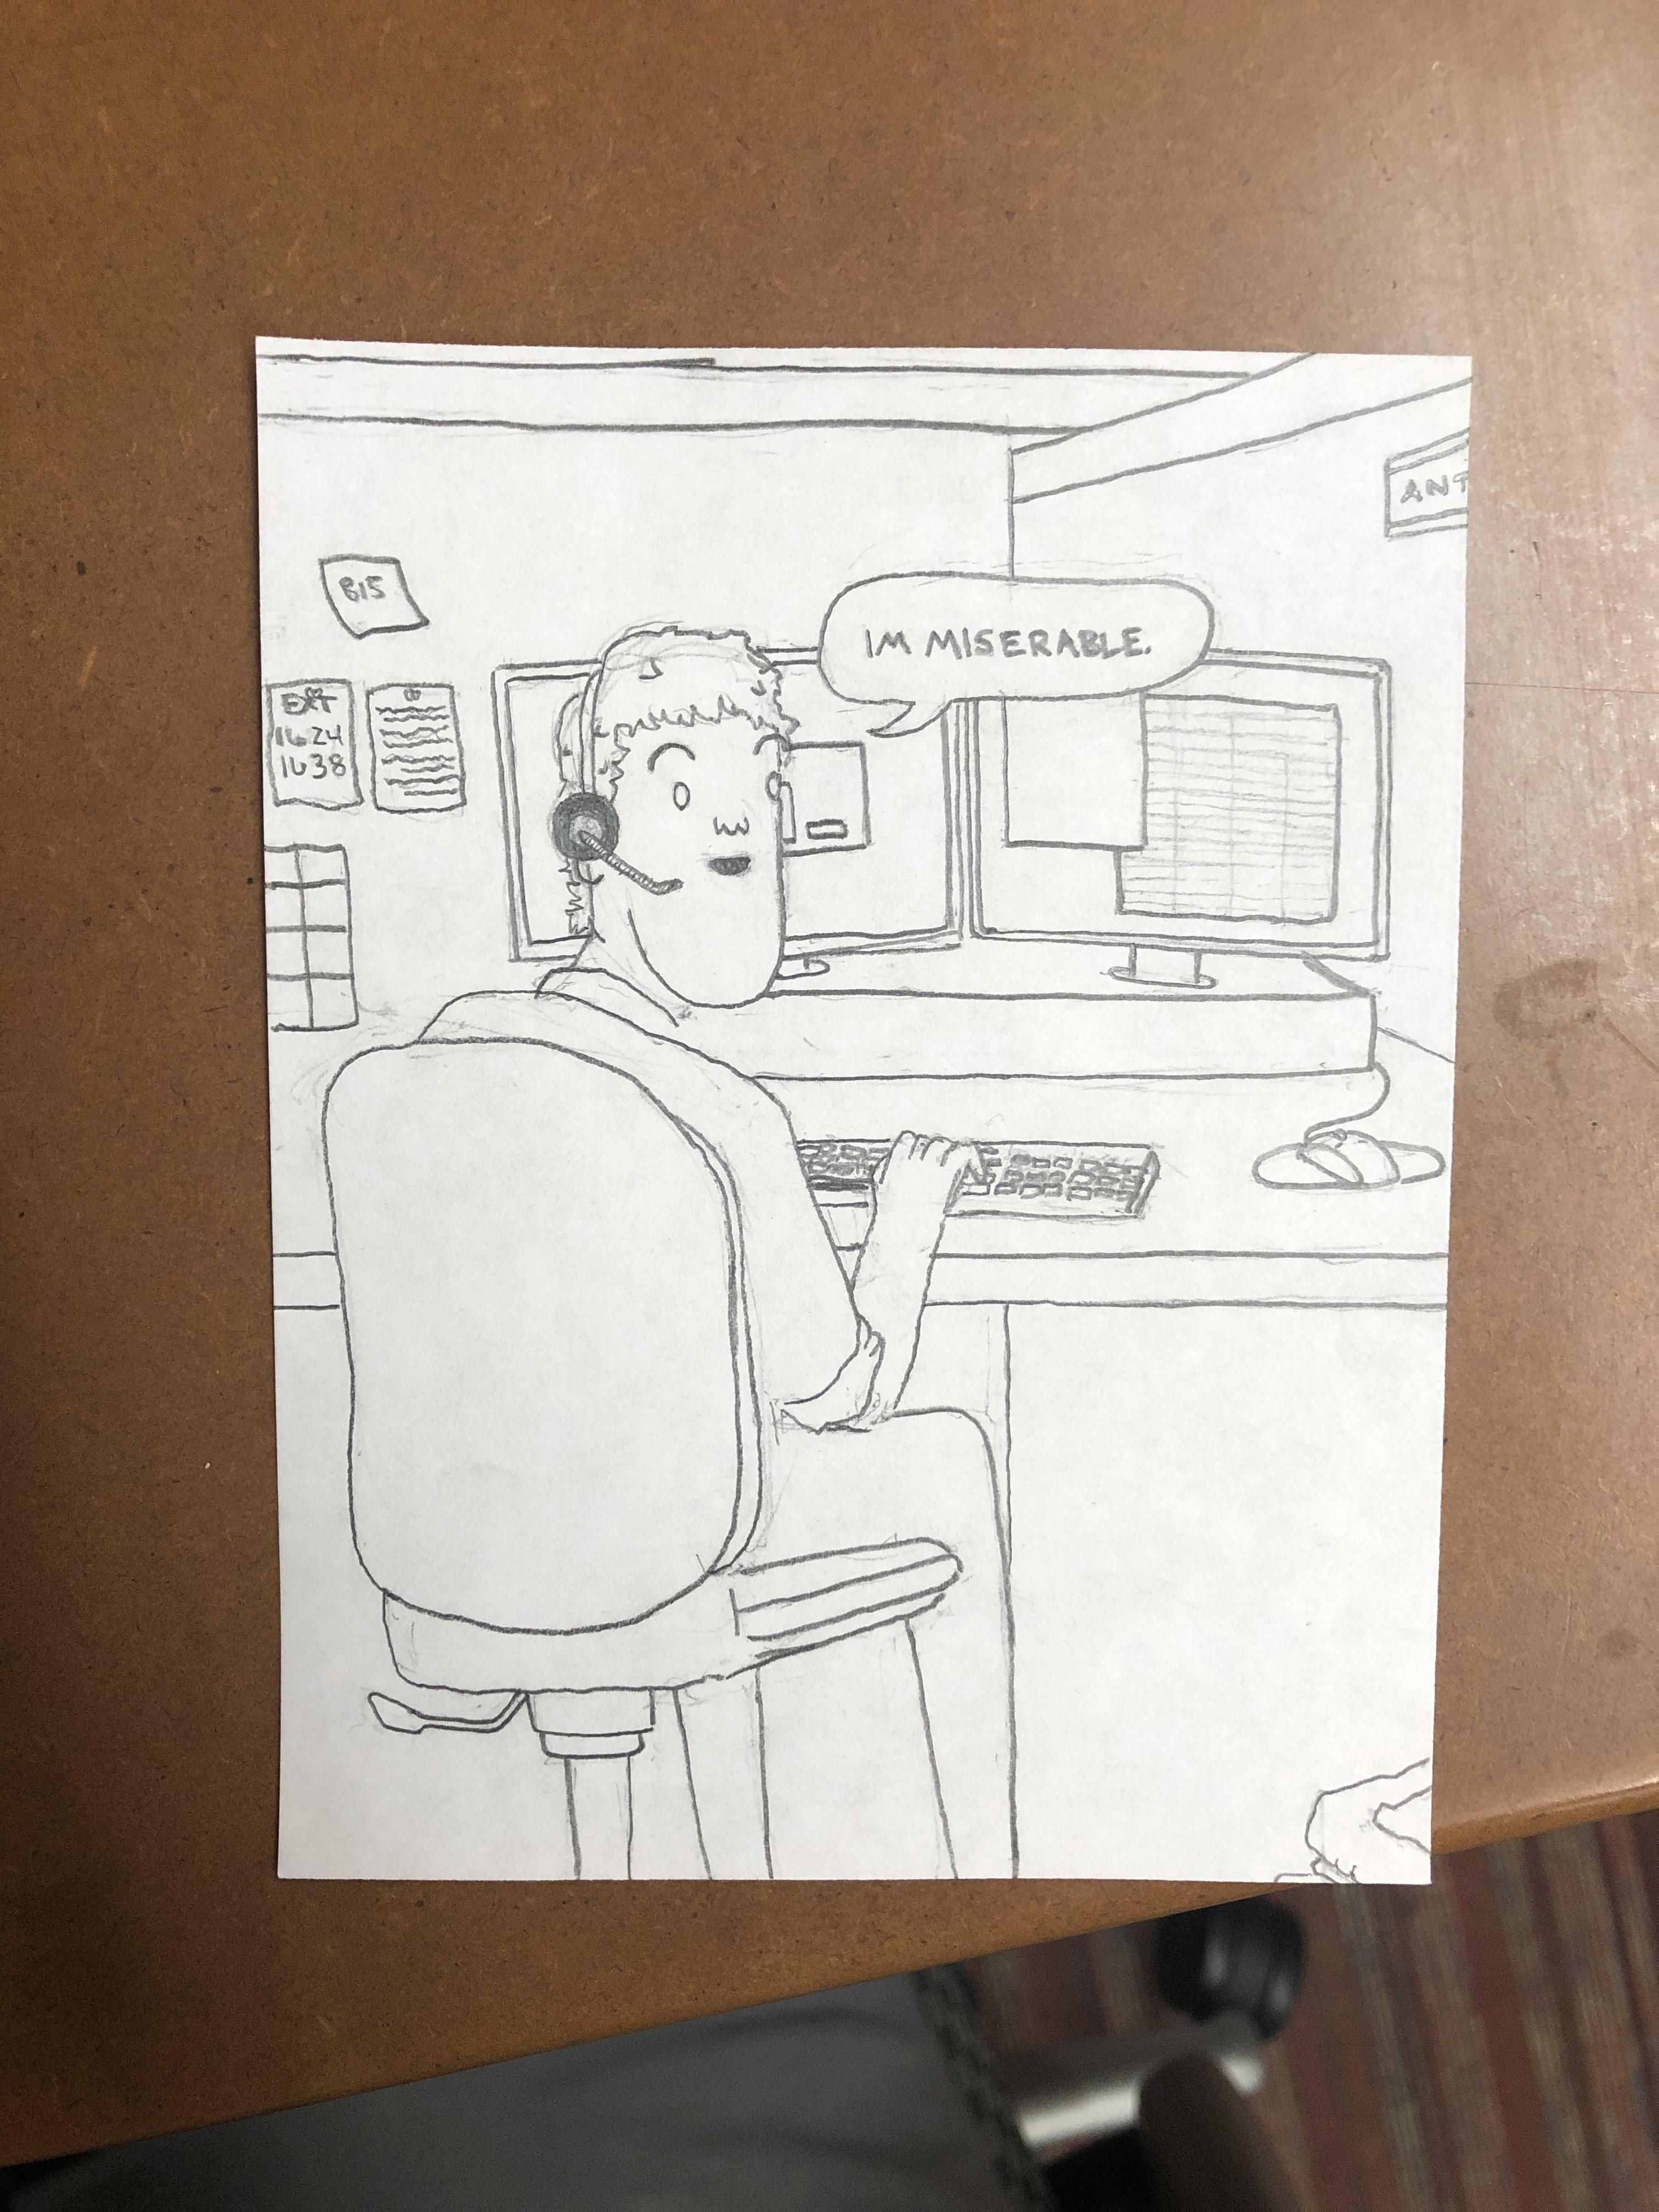 I work at a call center. Sometimes I like to draw my callers; but today I thought I’d switch it up a bit. I drew myself: